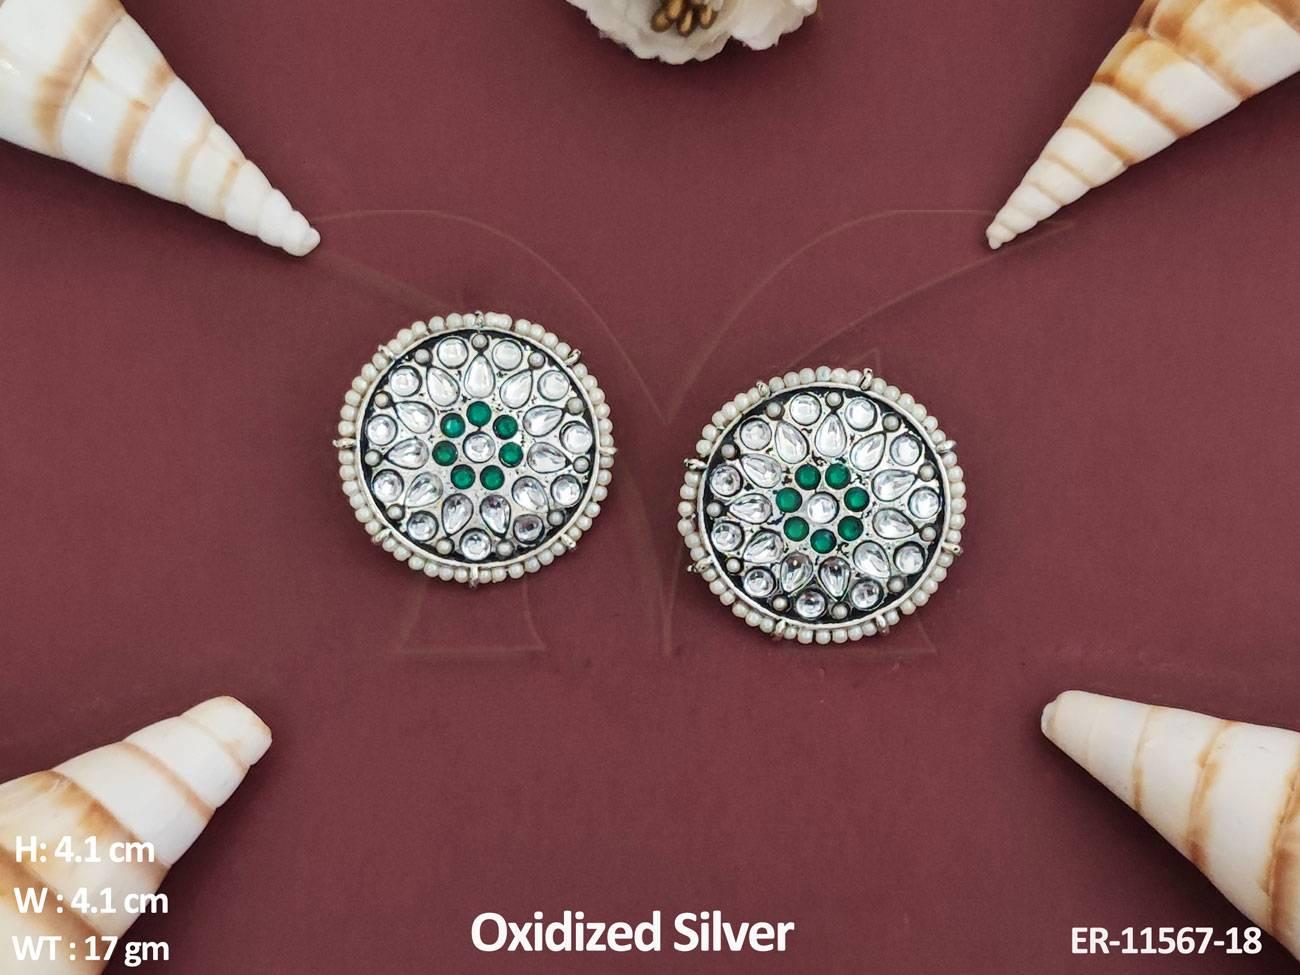 Designed with beauty and sophistication in mind, these earrings will elevate your look to new levels.